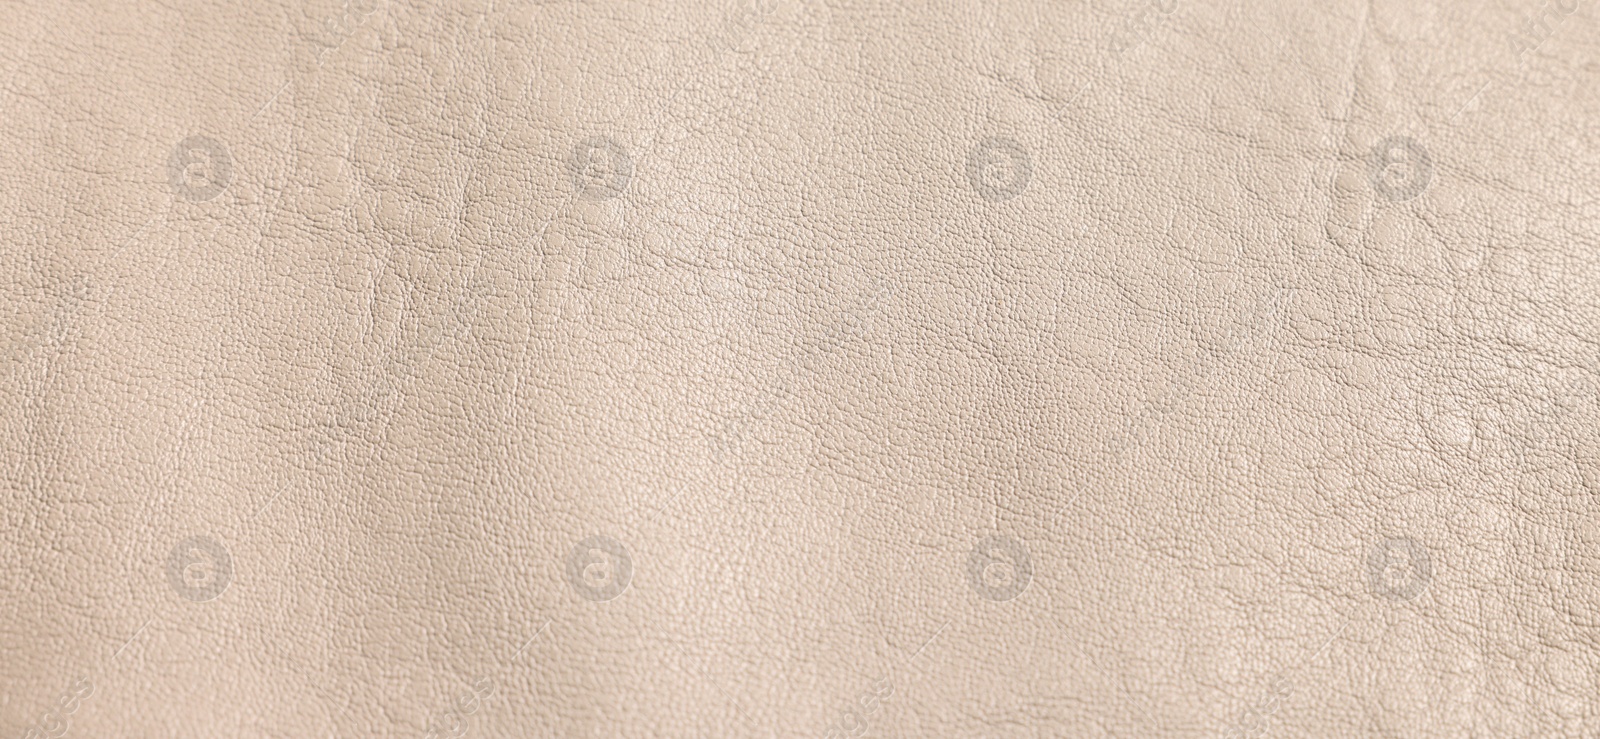 Photo of Beige natural leather as background, above view